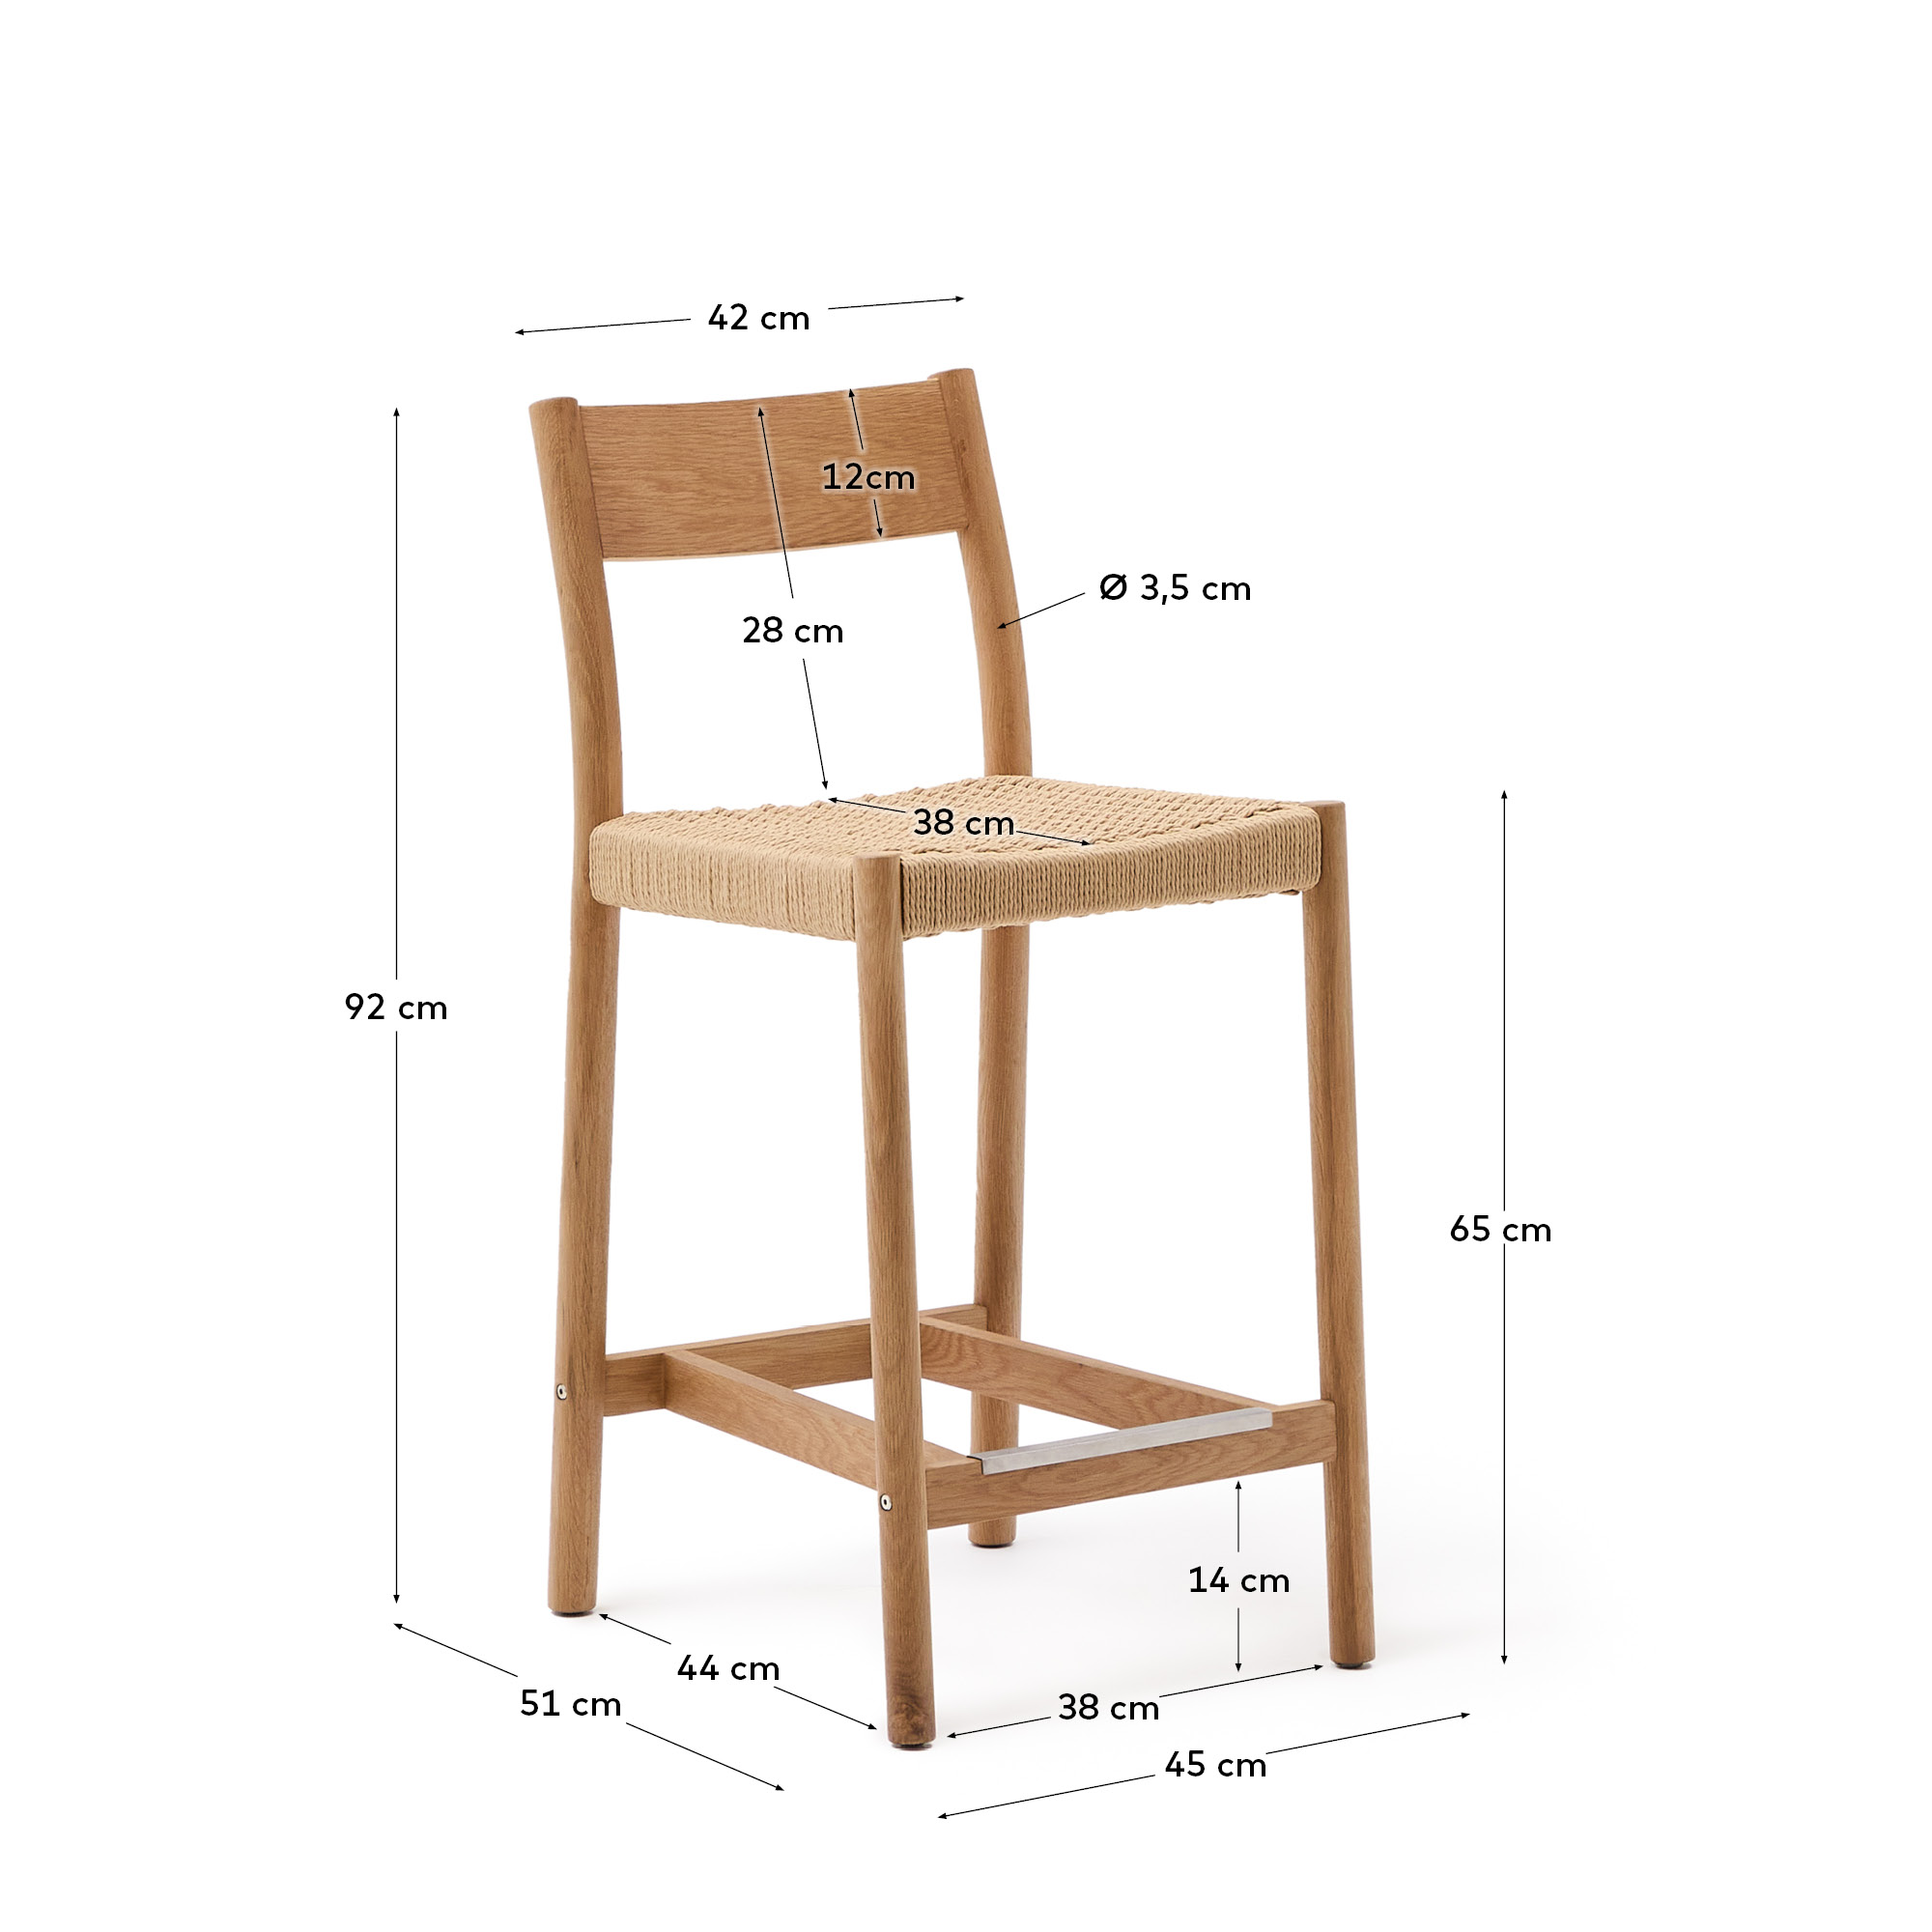 Yalia stool with a backrest in solid oak wood in a natural finish, and rope cord seat, 65 cm 100% FSC - 크기